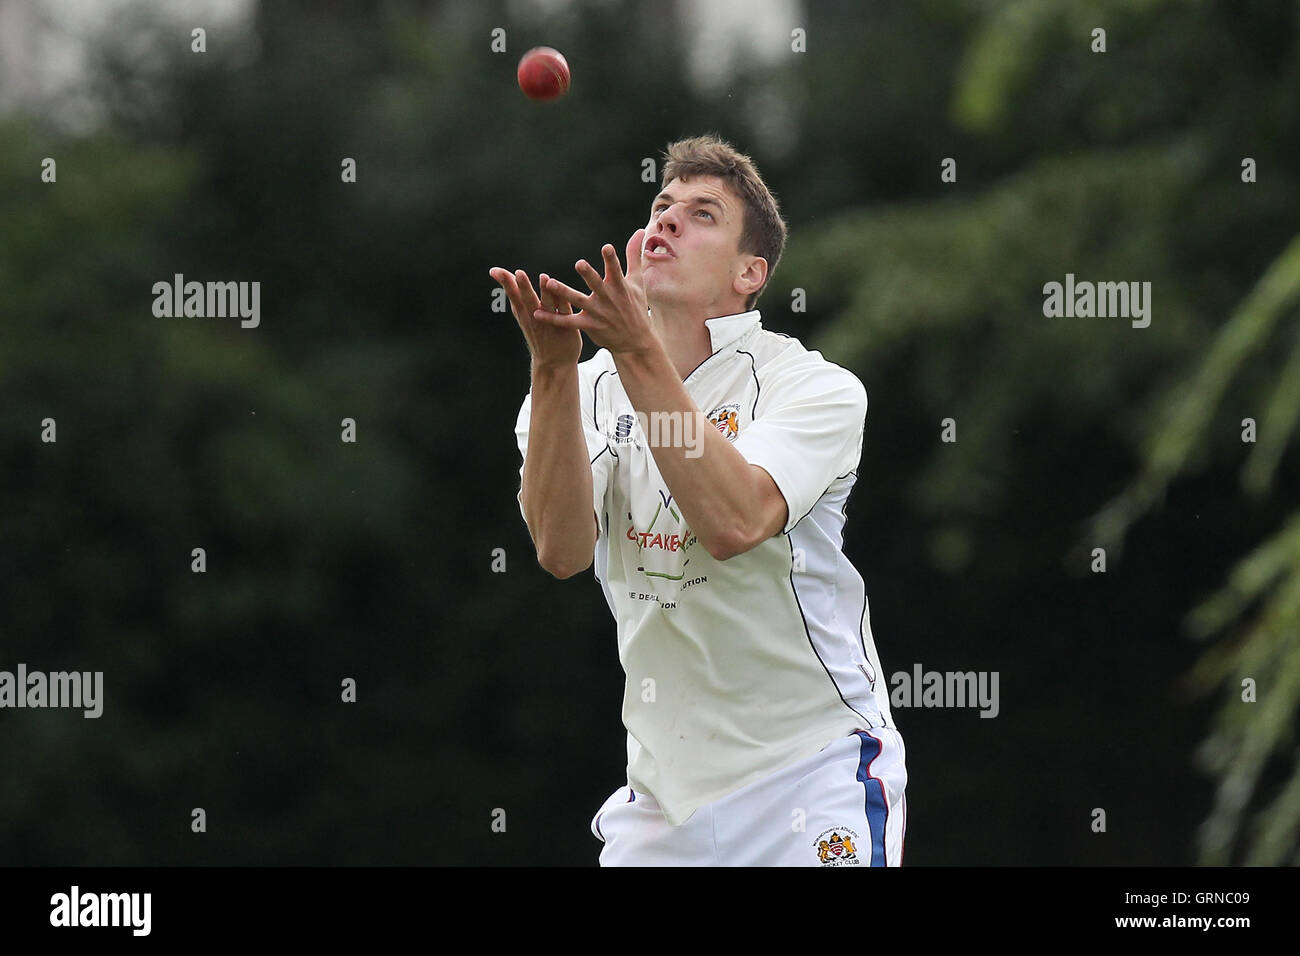 Hornchurch Athletic claim the 8th Brookweald wicket - Hornchurch Athletic CC vs Brookweald CC - Mid-Essex Cricket League at Hylands Park - 30/08/14 Stock Photo